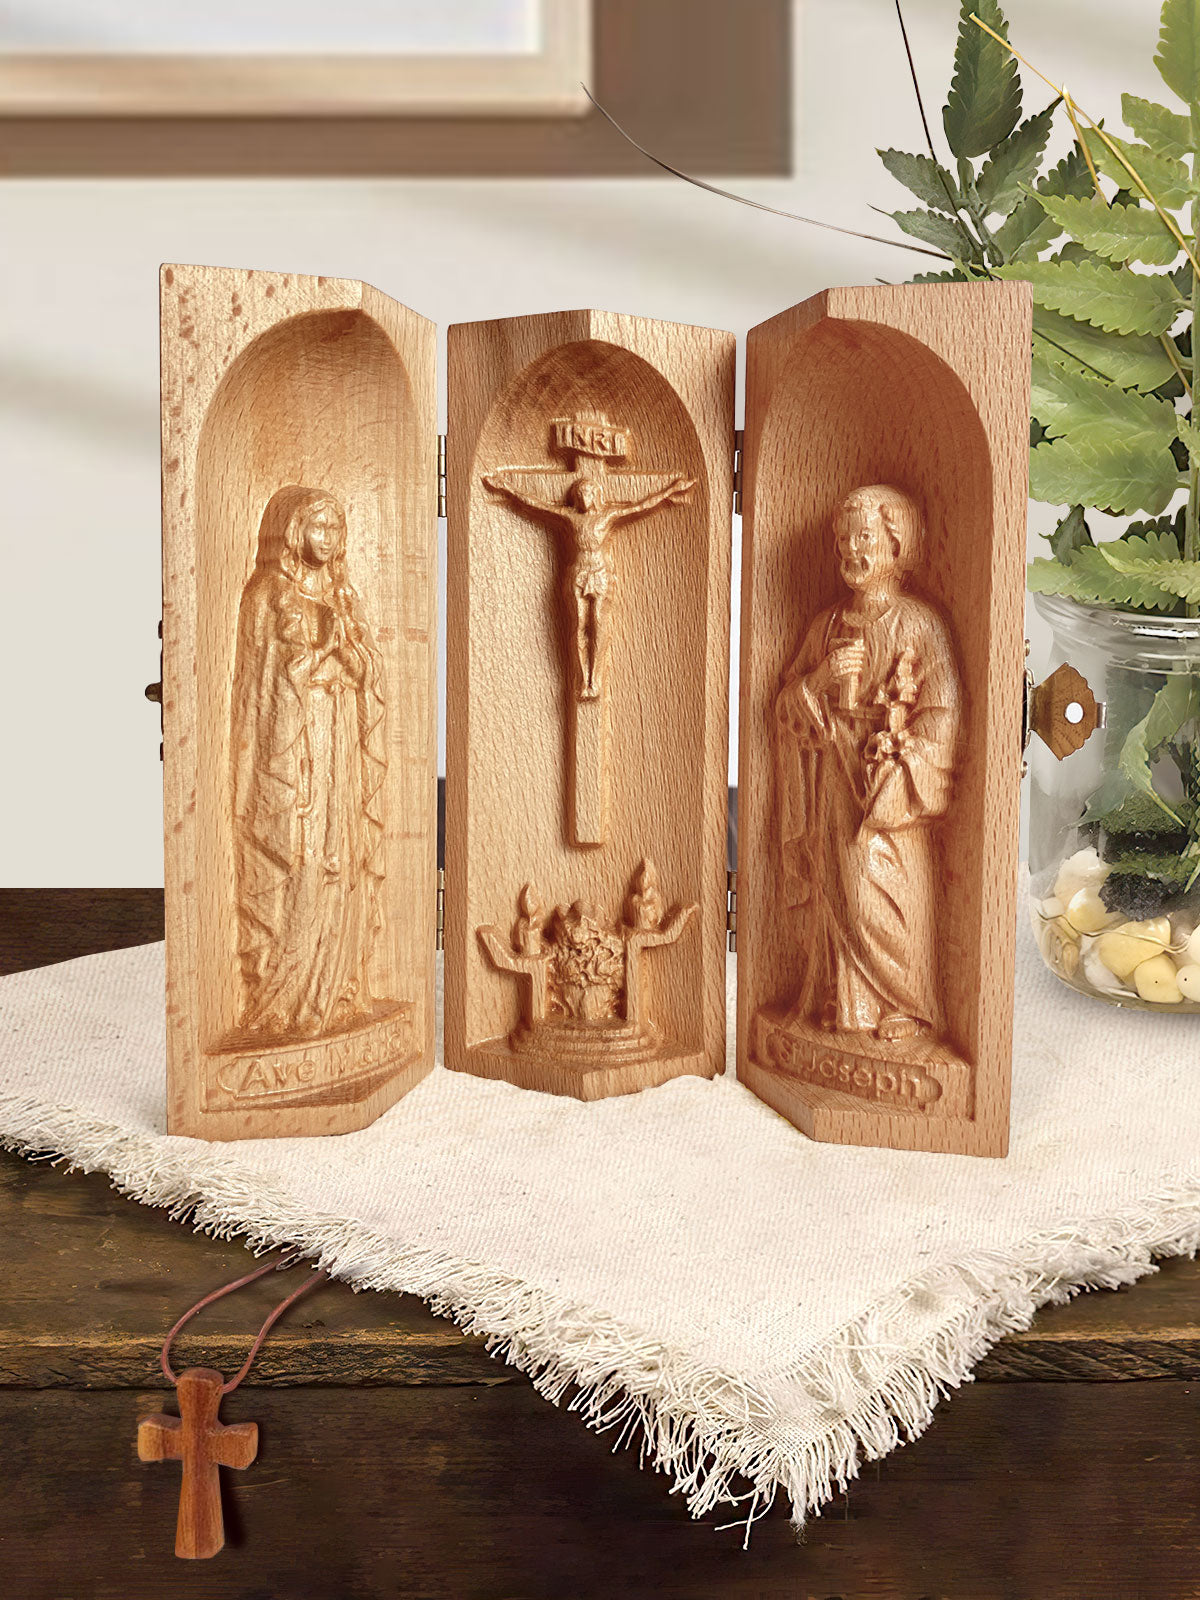 The Holy Family - Openable Wooden Cylinder Sculpture